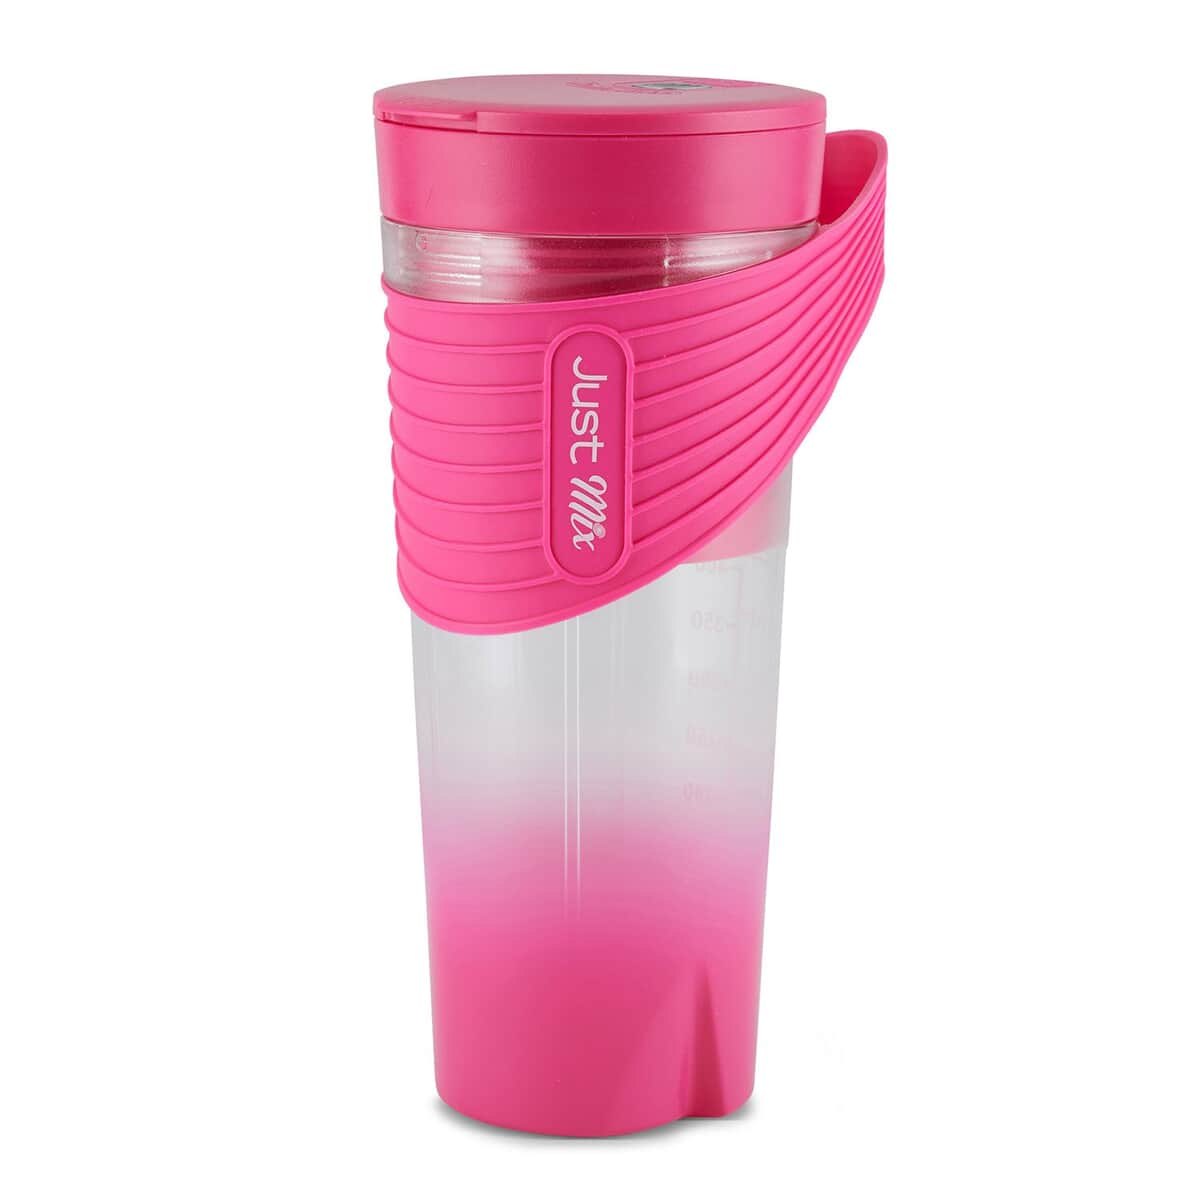 Just Mix Personal Blender with USB Charger -Pink image number 0